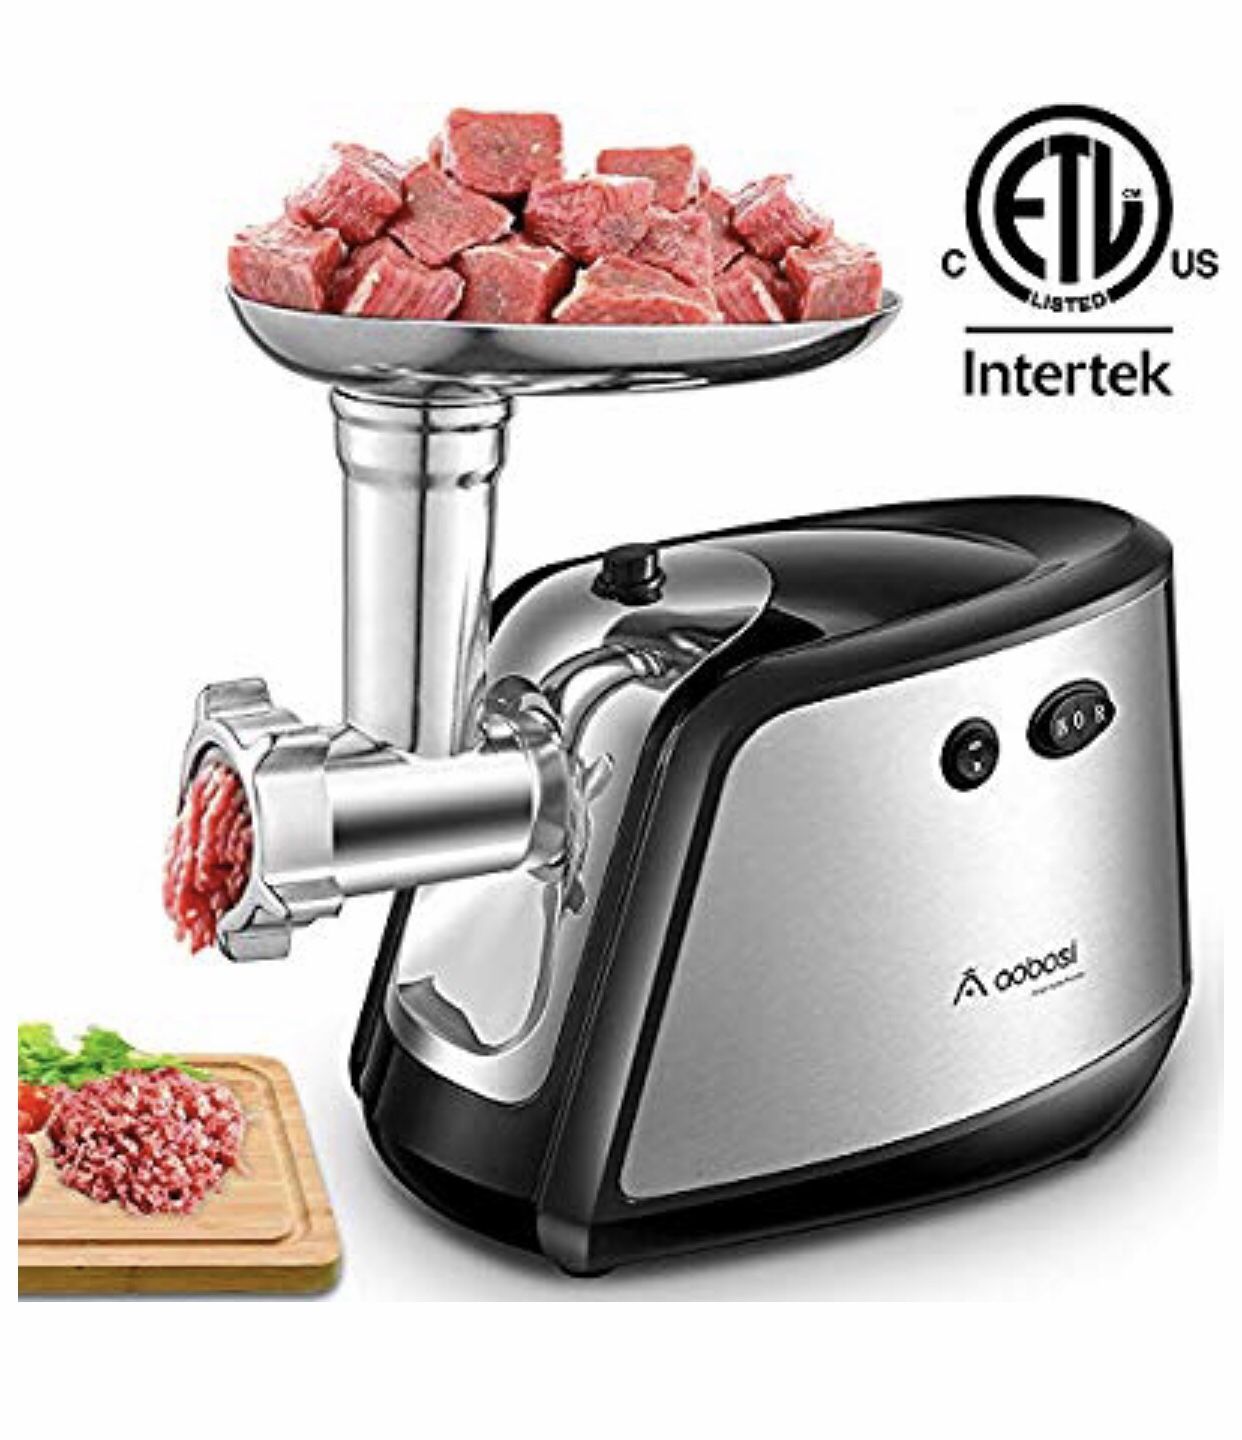 Aobosi Electric Meat Grinder 【1200W MAX】3-IN-1 Stainless Steel Food Grinder with 3 Stainless Steel Grinding Plates,Kubbe & Sausage Attachment｜Heavy D